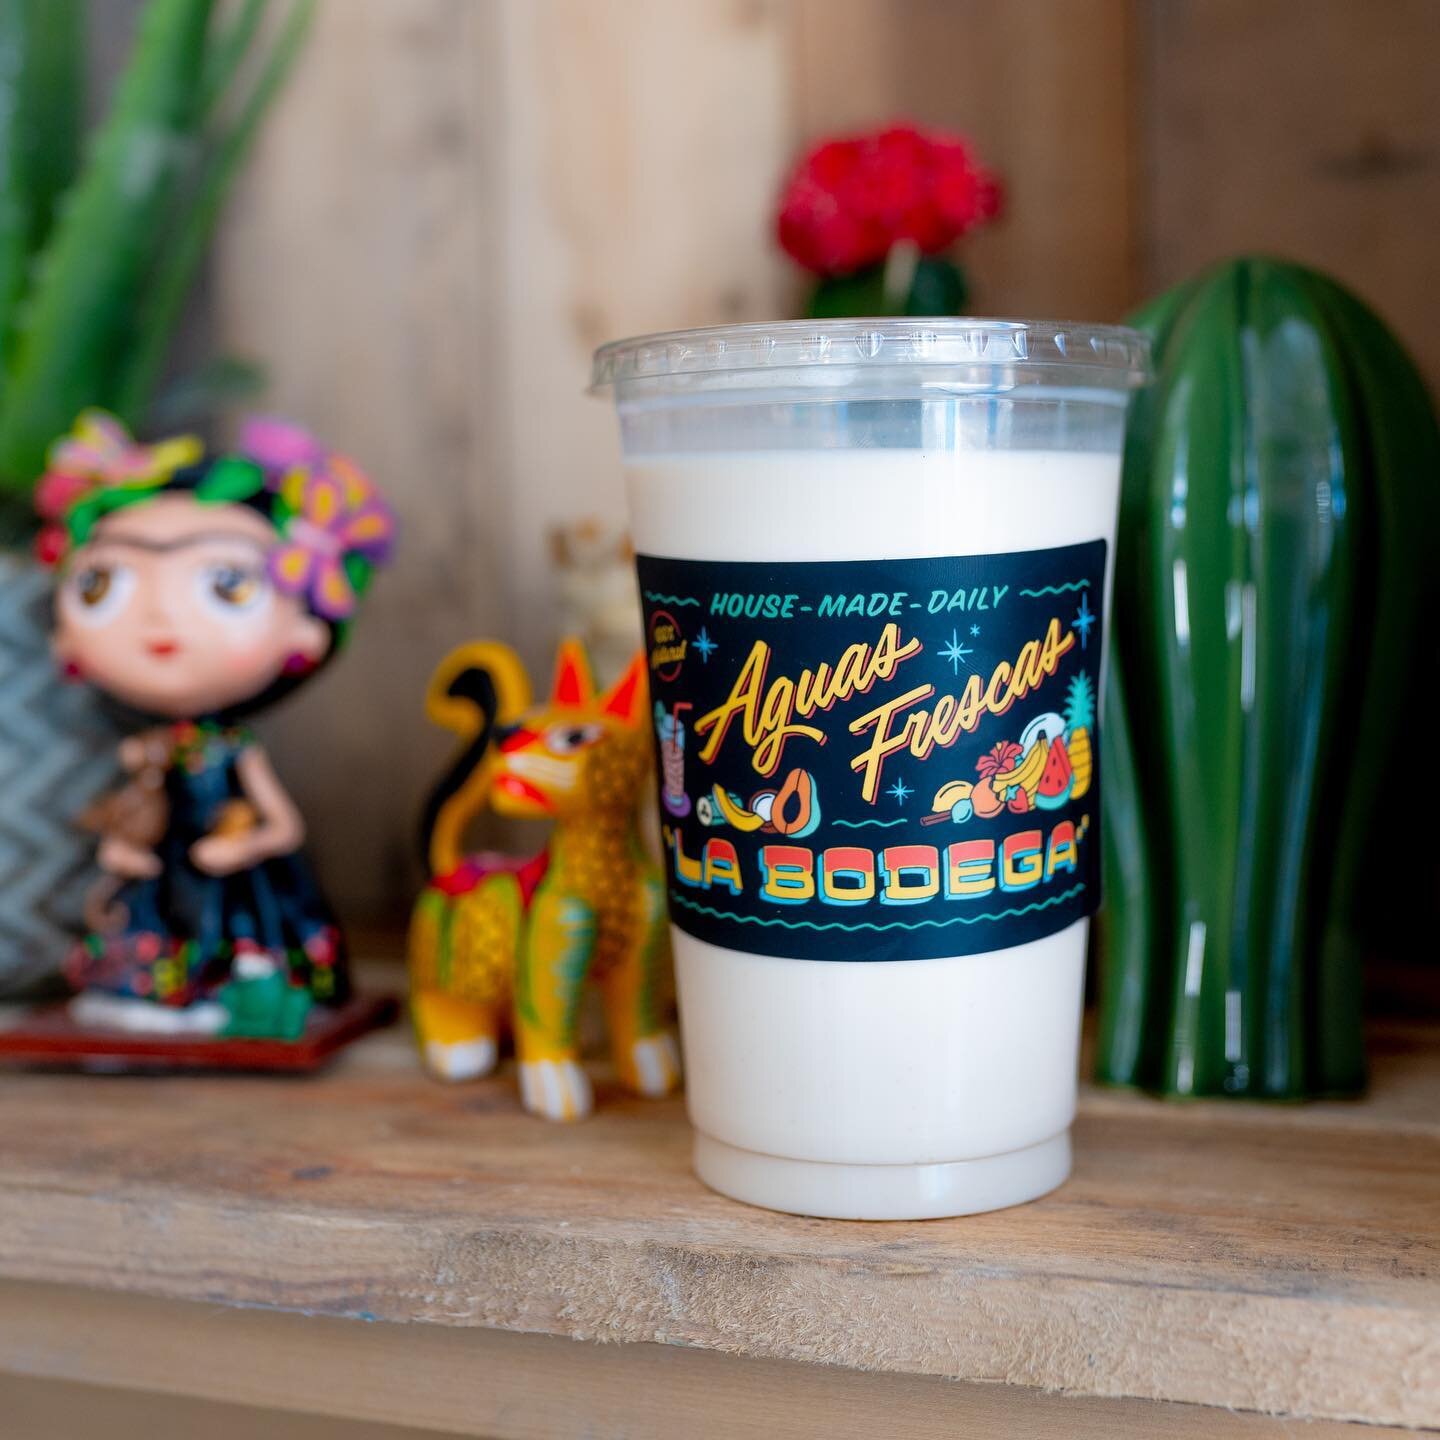 We will have Horchata BACK in stock tonight!

We have FRESHLY made Aguas Frescas for you to enjoy every day 😍

🍍Pineapple
🍉 Watermelon
🍈 Honey Dew
🧡 Cantaloupe 
&hearts;️Jamica
🥛Horchata

____

We are open until 3AM!

📸: @emery_meyer

#boutiqu